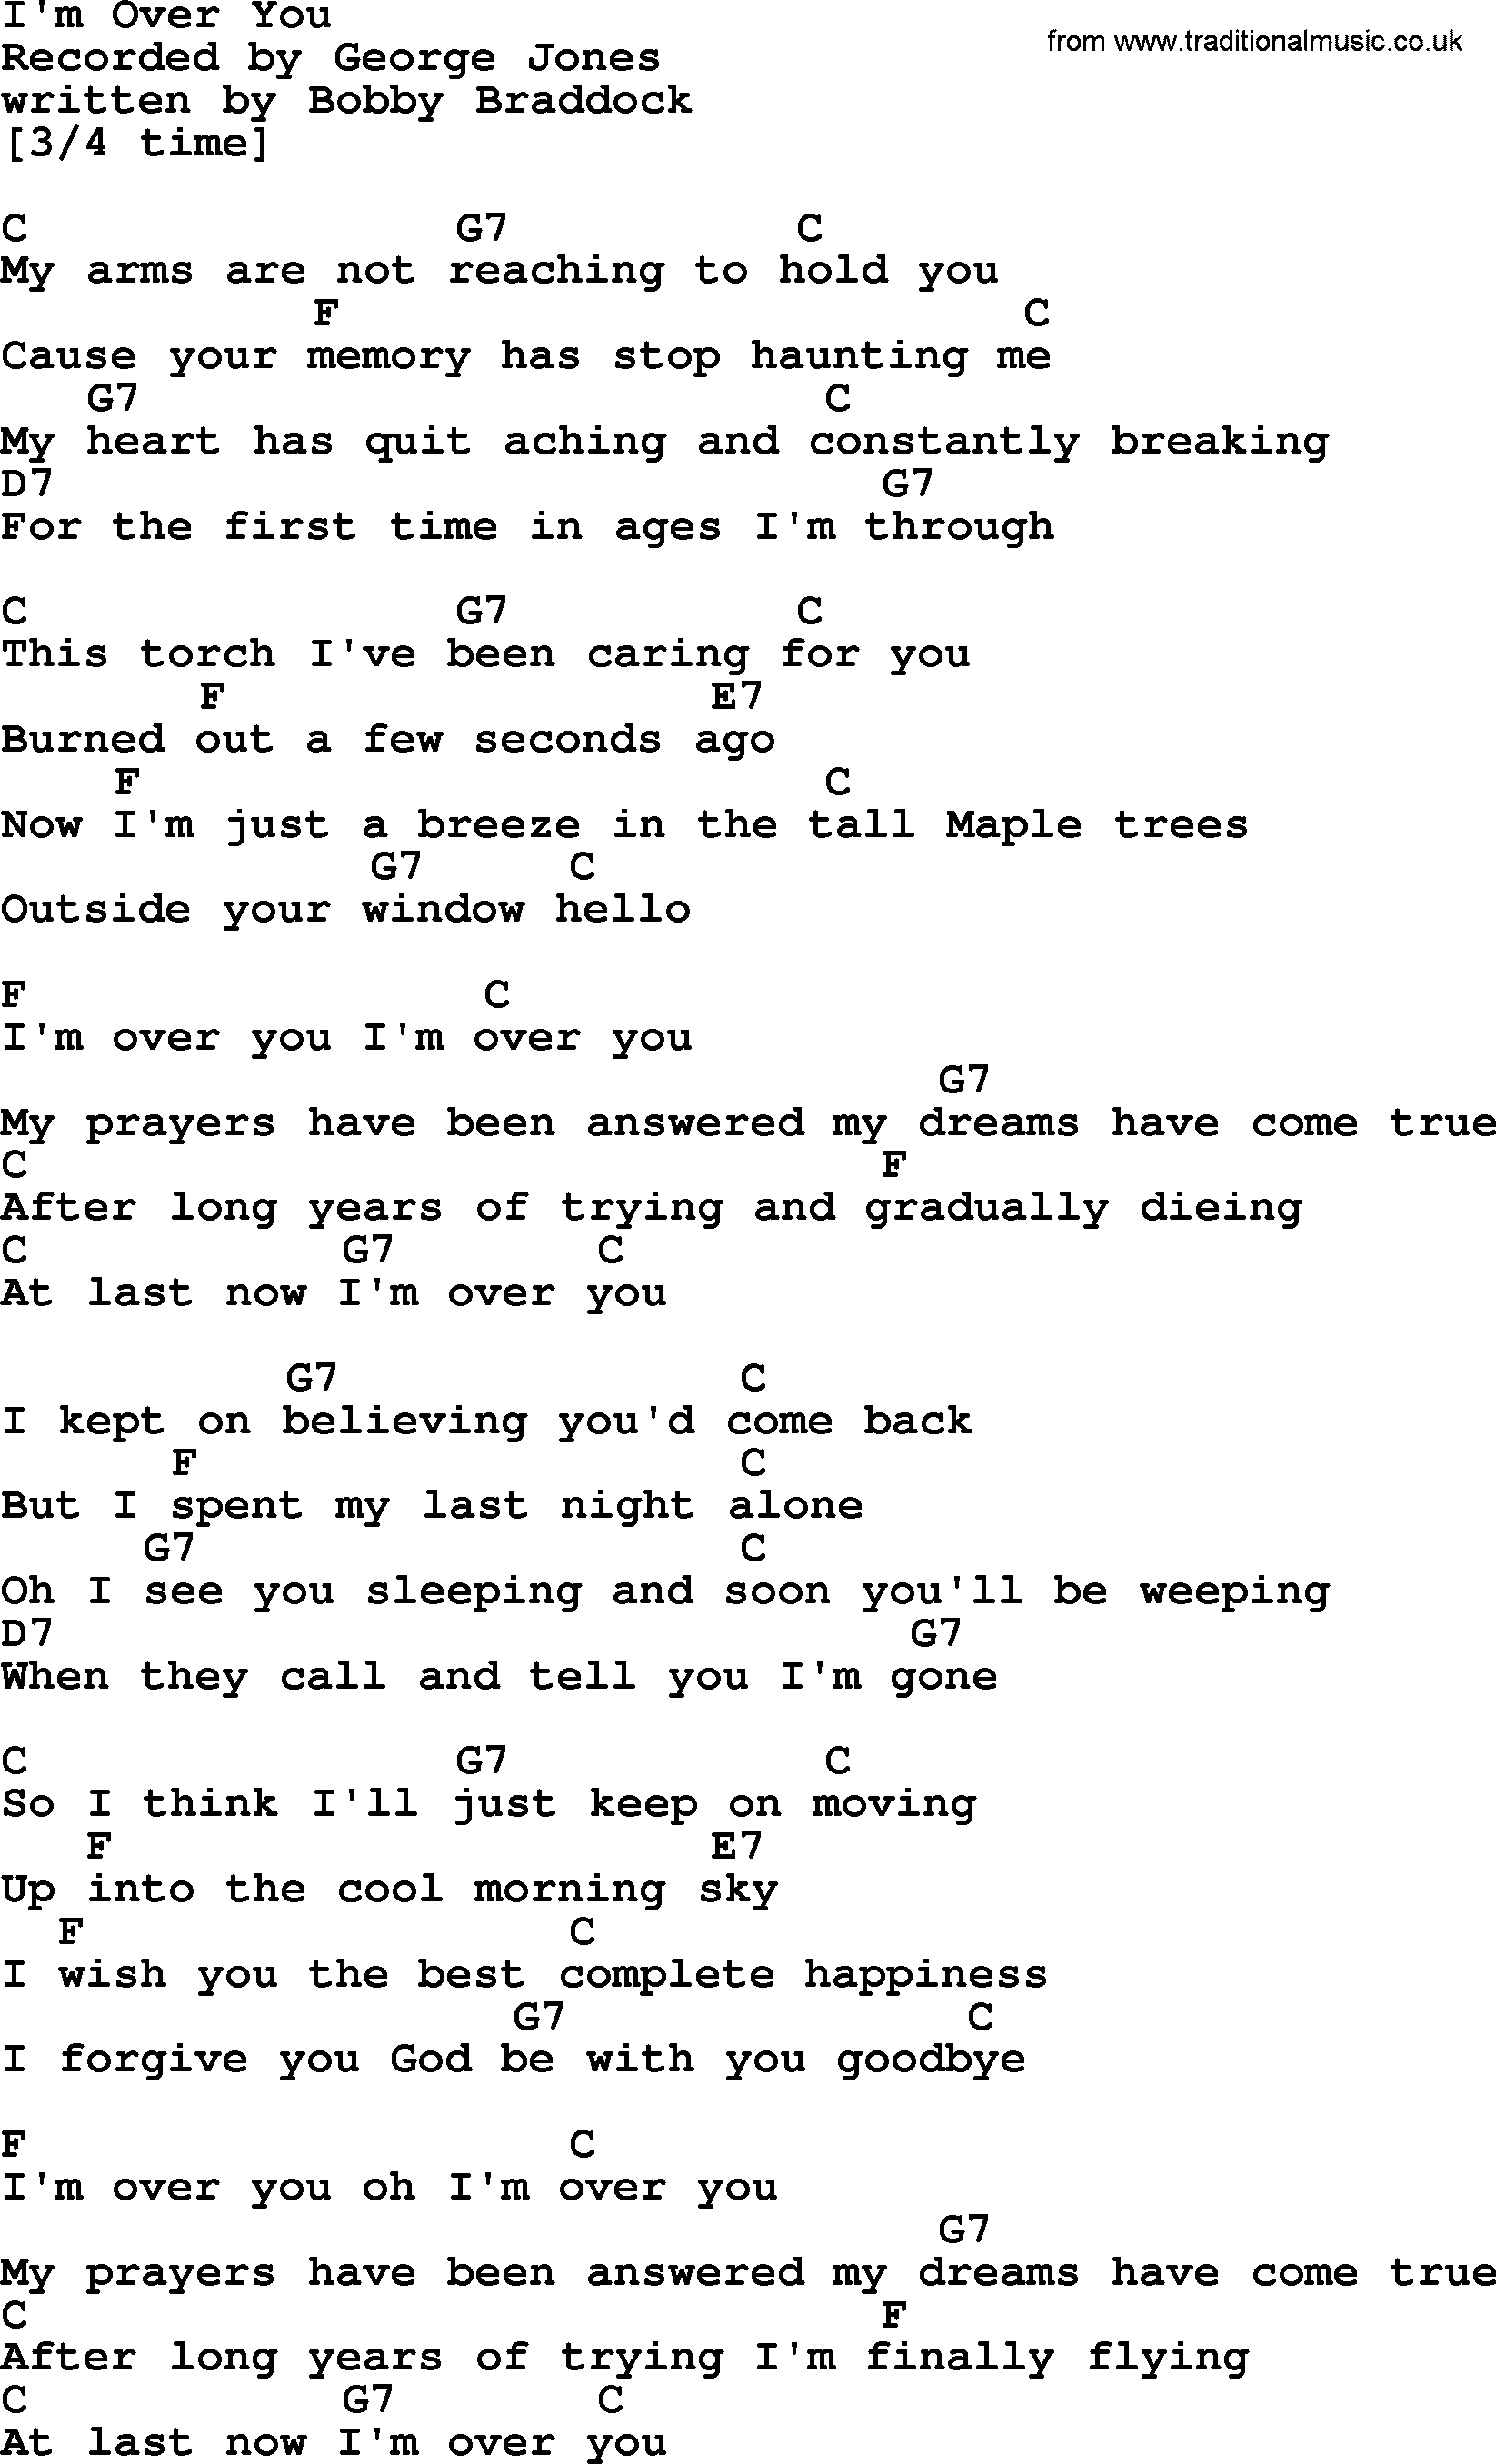 George Jones song: I'm Over You, lyrics and chords